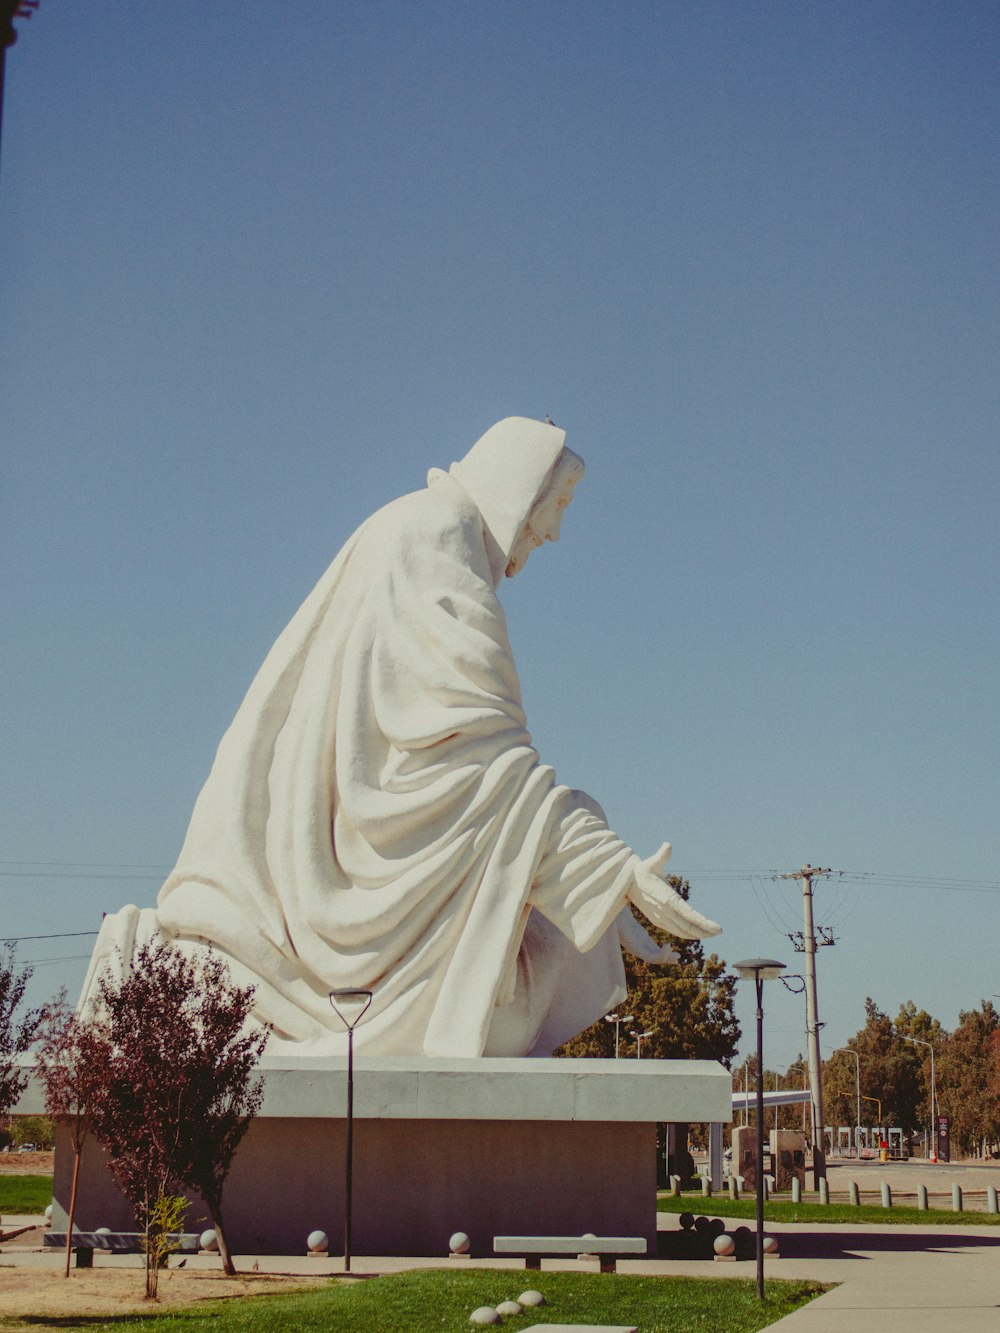 a large white statue of a person with a white cloak